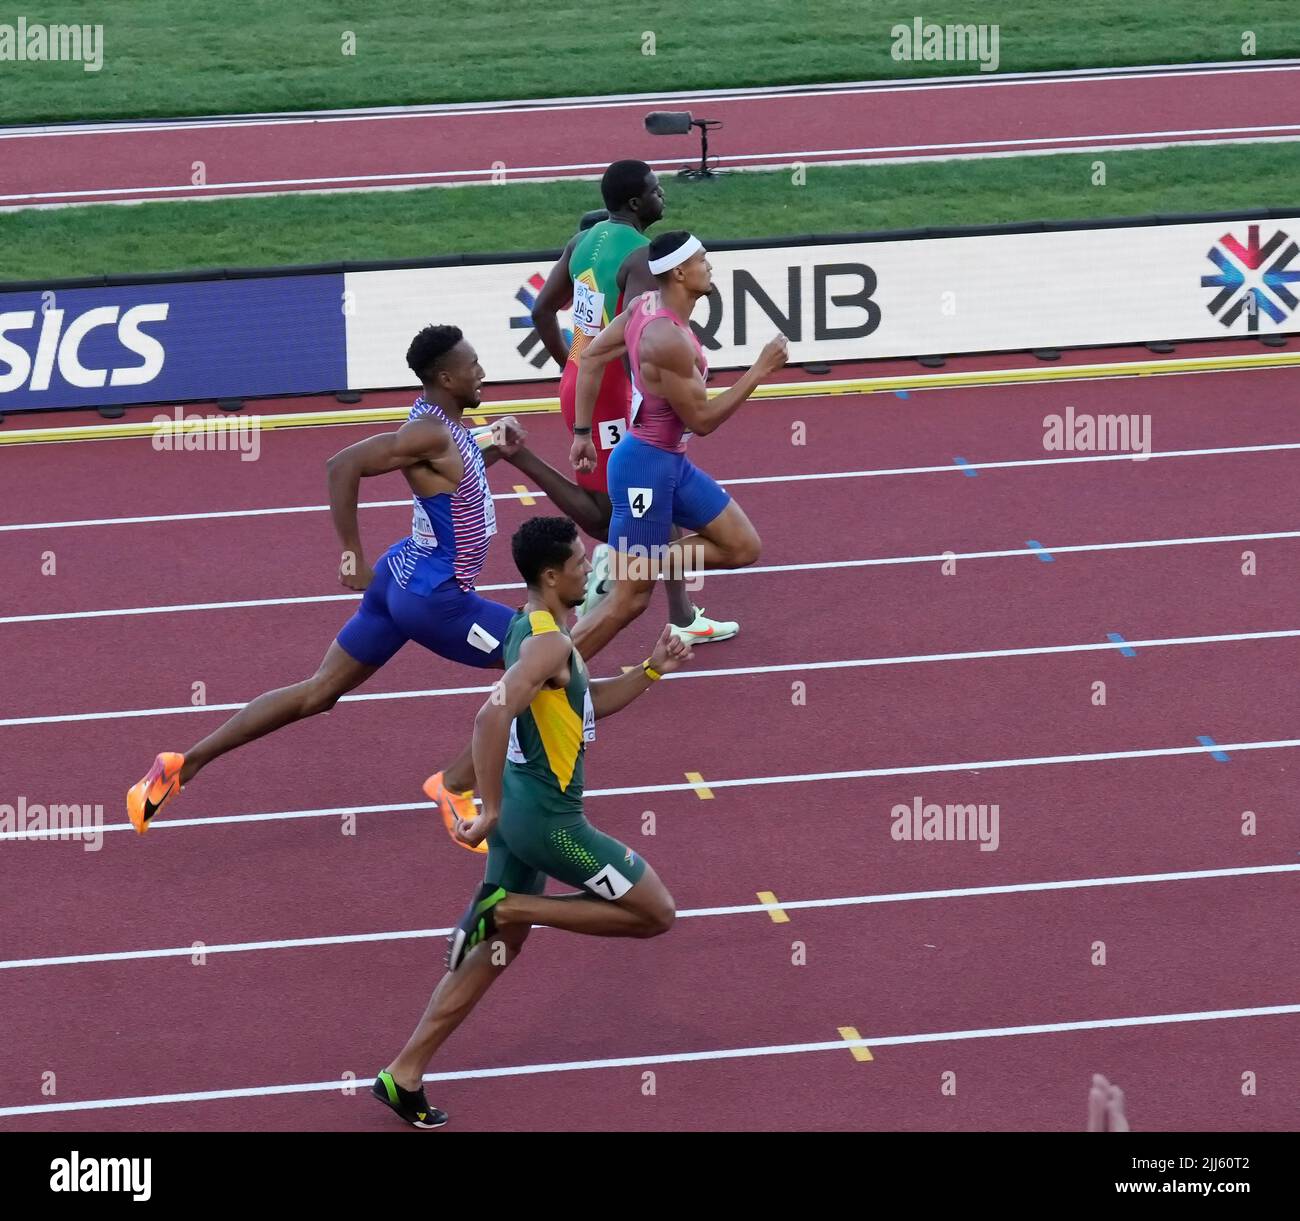 Eugene,, 22 Jul 2022 Michael Norman (USA) #4 Seen in action during the World Athletics Championships at Hayward Field Eugene USA on July 22 2022 Alamy Live News Stock Photo